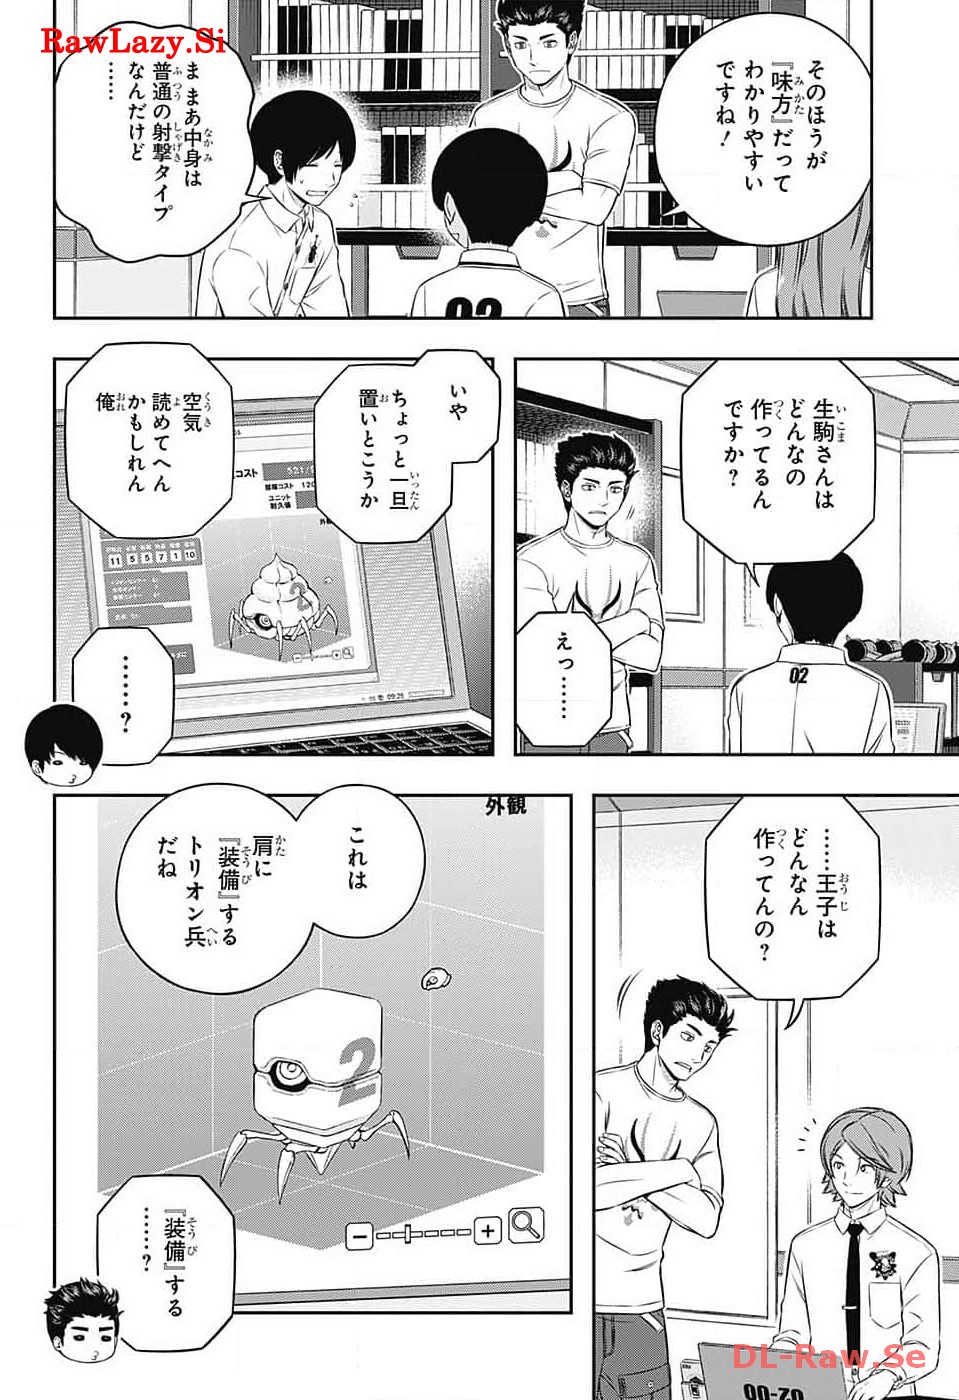 World Trigger - Chapter 239 - Page 2